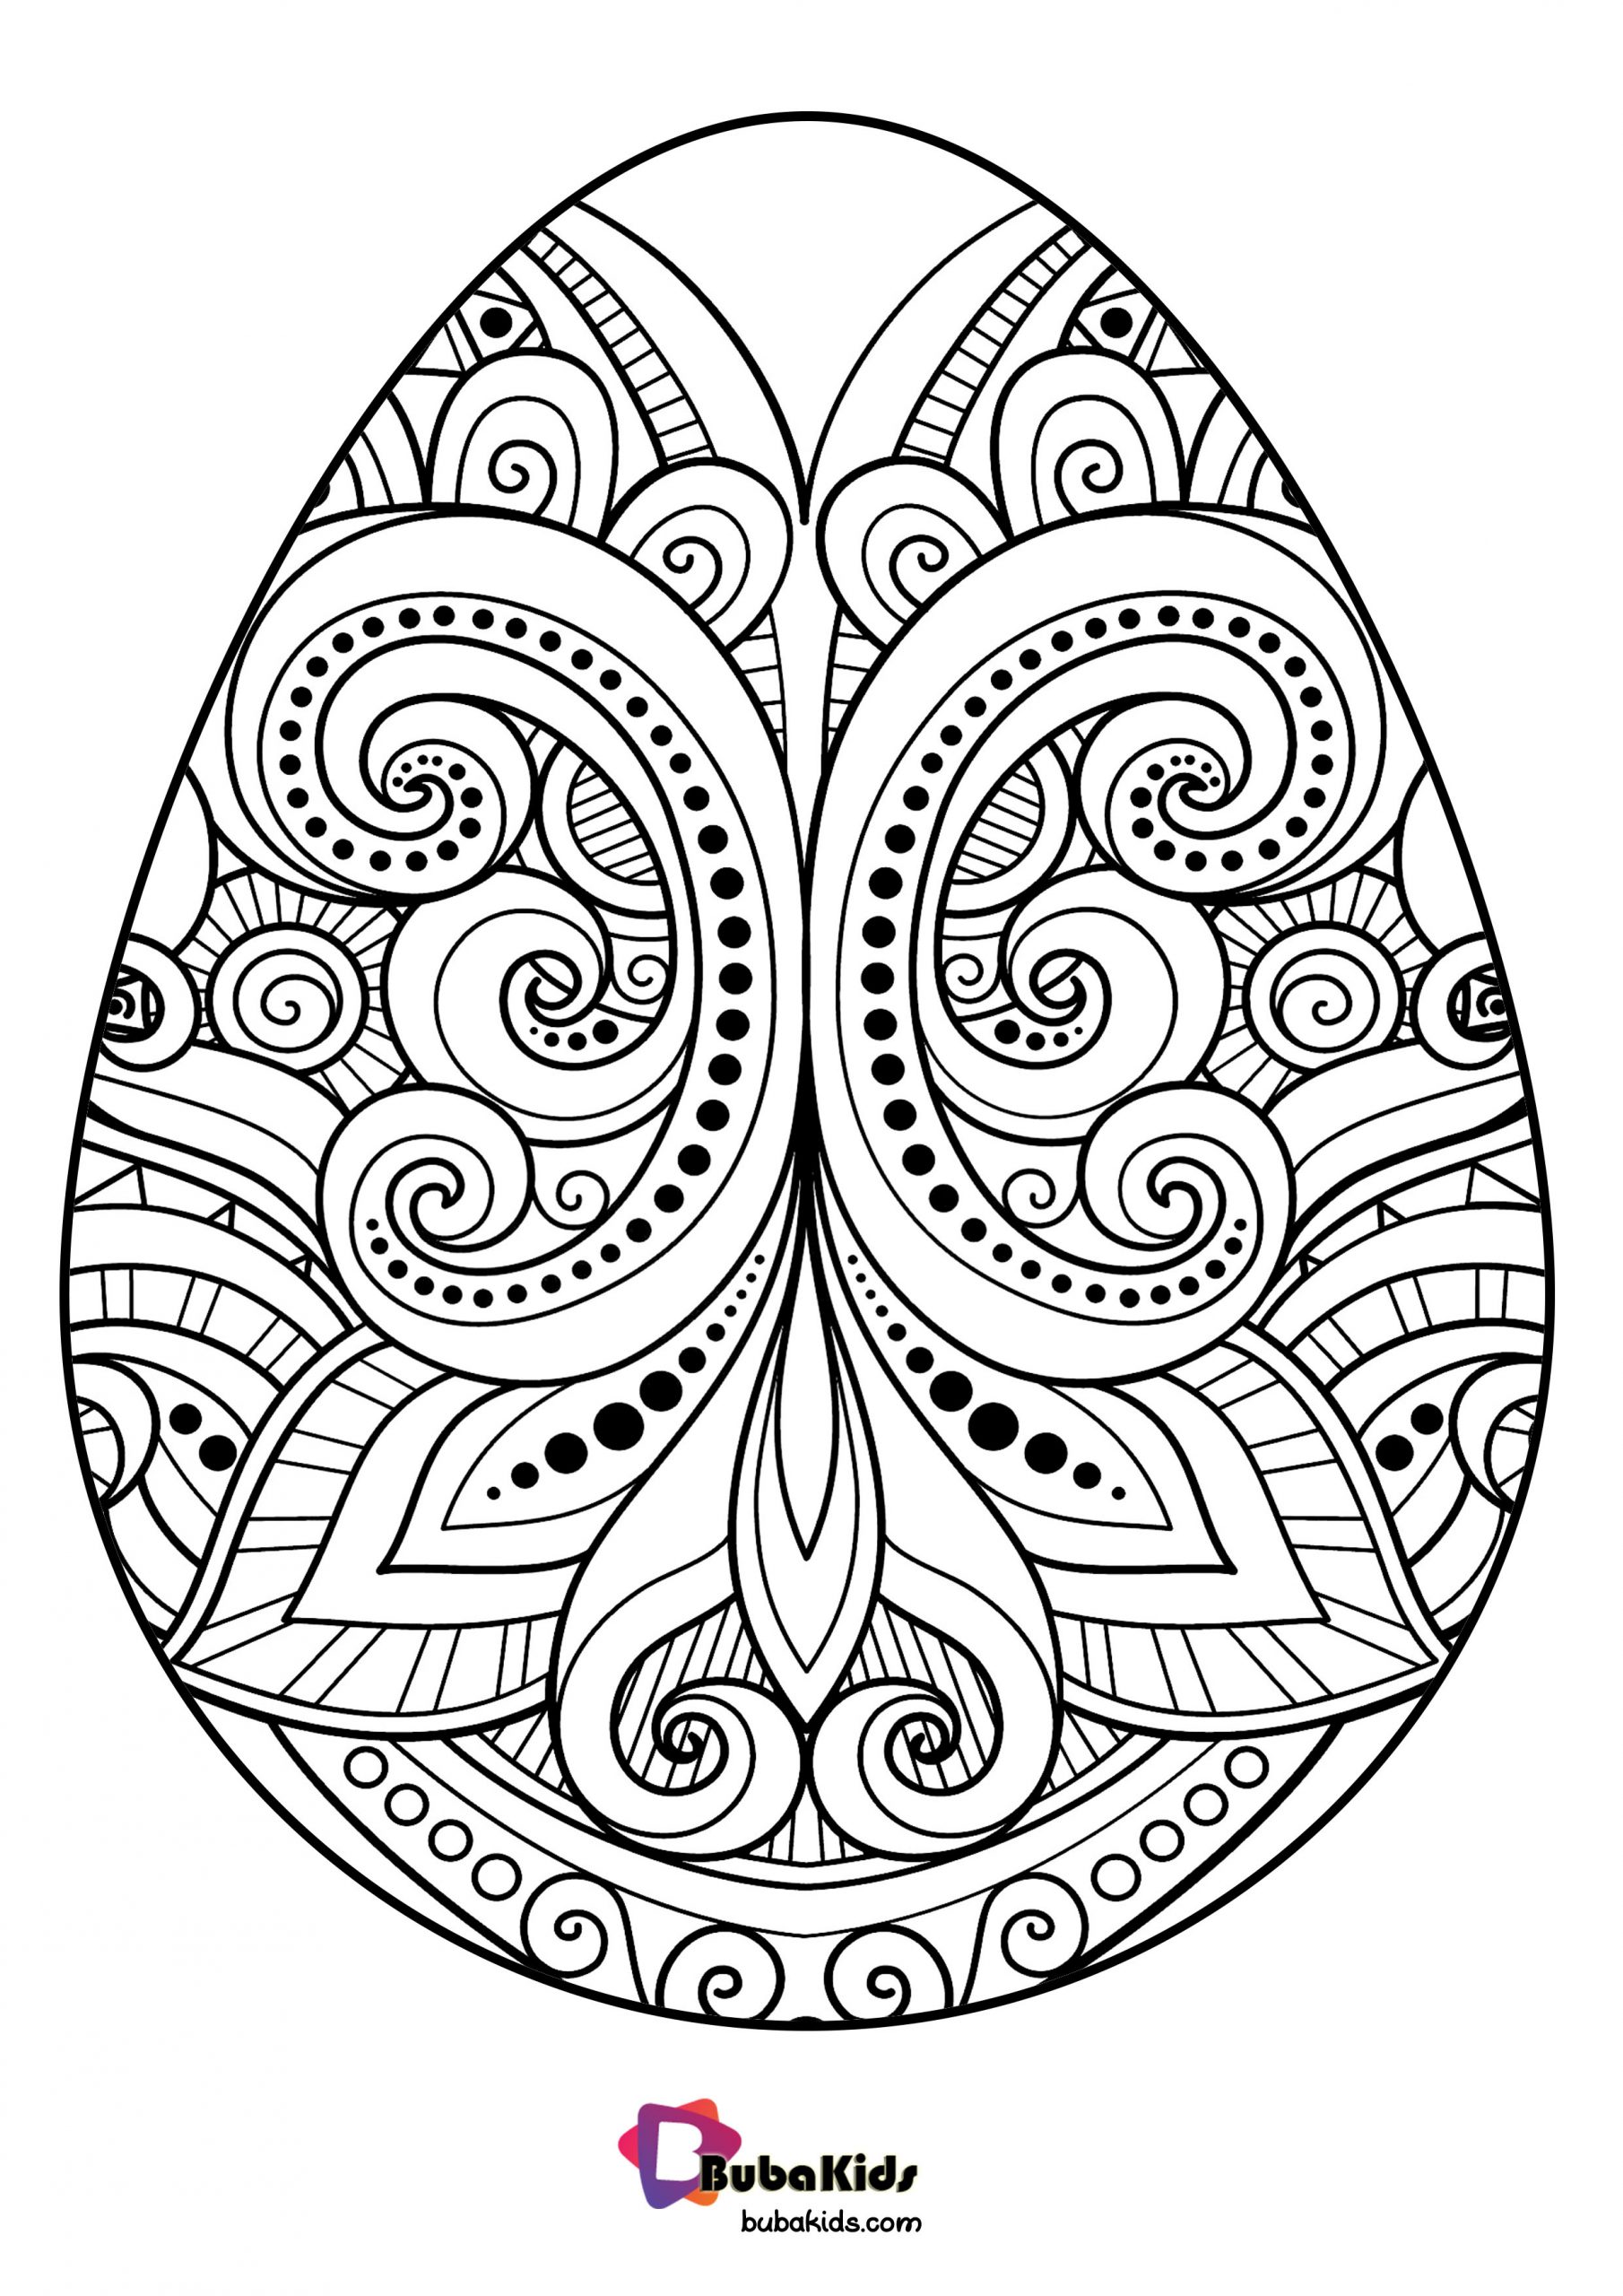 Happy Easter Egg Coloring Page Wallpaper